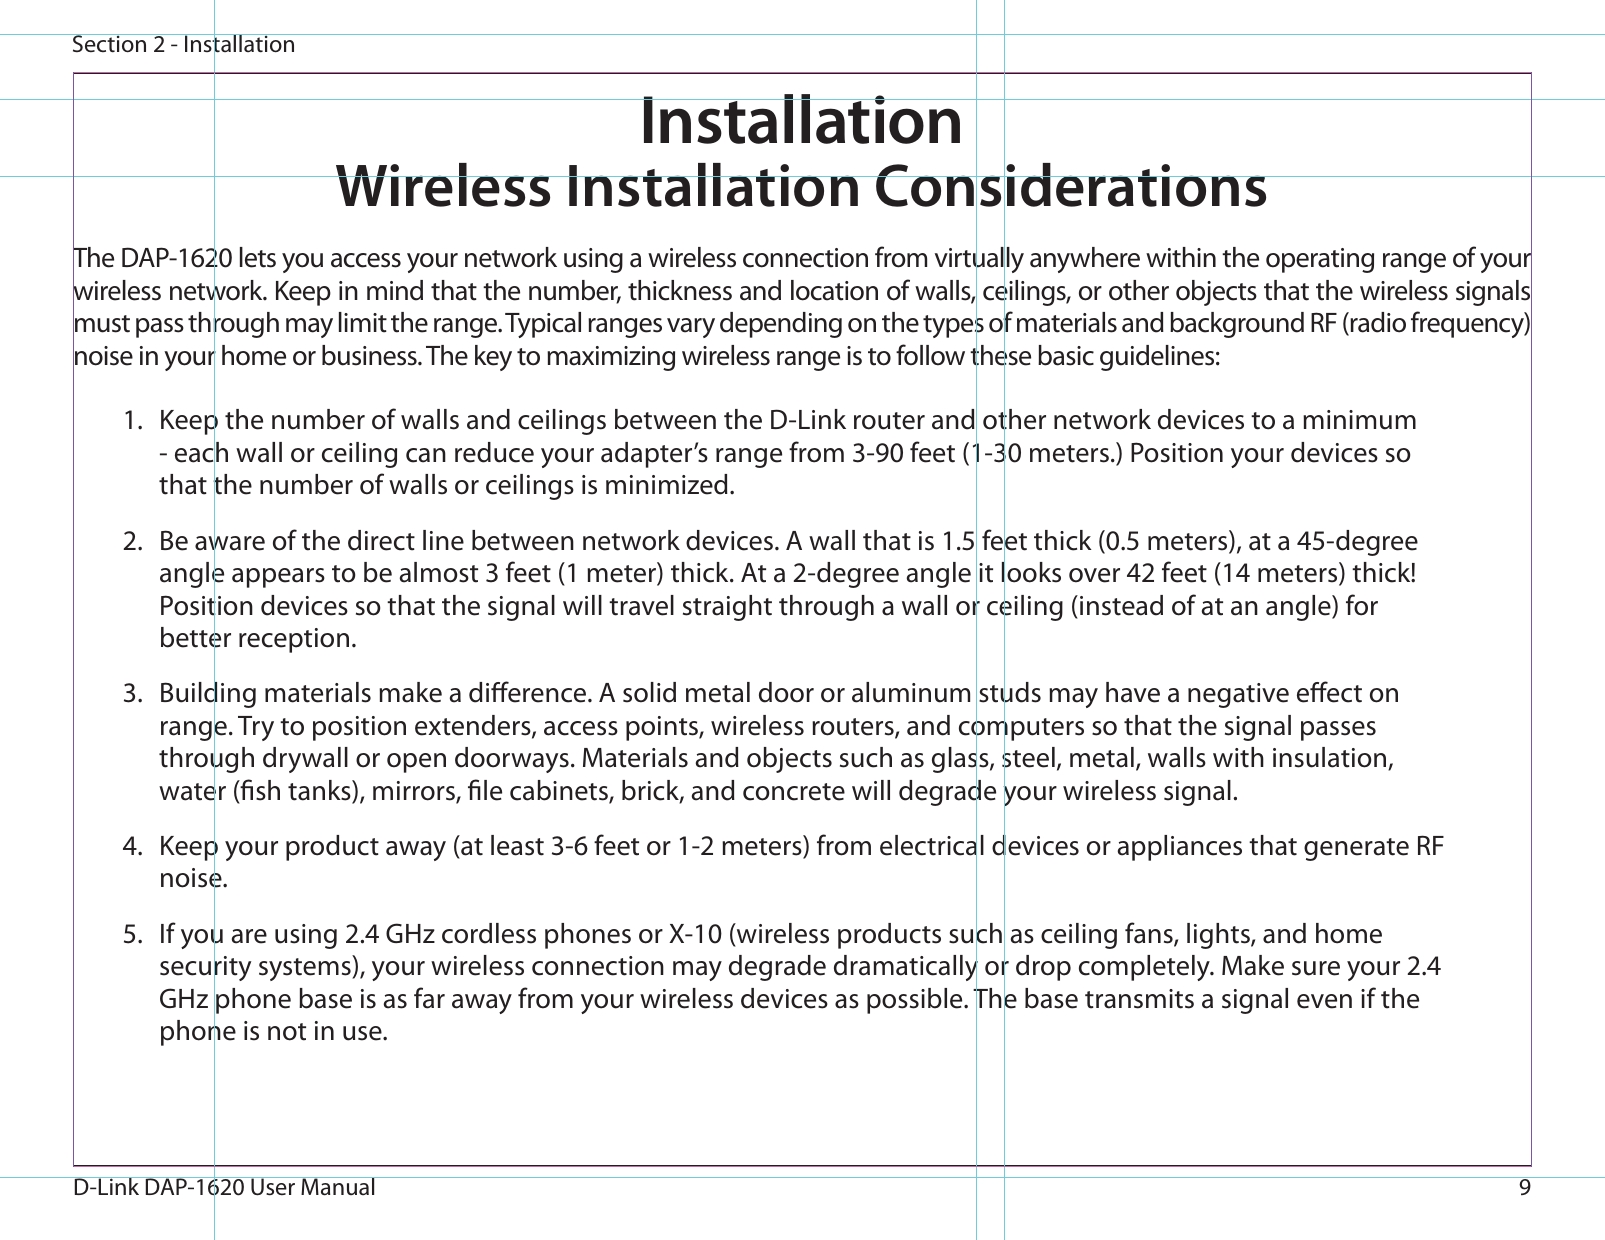 9D-Link DAP-1620 User ManualSection 2 - InstallationWireless Installation ConsiderationsThe DAP-1620 lets you access your network using a wireless connection from virtually anywhere within the operating range of your wireless network. Keep in mind that the number, thickness and location of walls, ceilings, or other objects that the wireless signals must pass through may limit the range. Typical ranges vary depending on the types of materials and background RF (radio frequency) noise in your home or business. The key to maximizing wireless range is to follow these basic guidelines:1.  Keep the number of walls and ceilings between the D-Link router and other network devices to a minimum - each wall or ceiling can reduce your adapter’s range from 3-90 feet (1-30 meters.) Position your devices so that the number of walls or ceilings is minimized.2.  Be aware of the direct line between network devices. A wall that is 1.5 feet thick (0.5 meters), at a 45-degree angle appears to be almost 3 feet (1 meter) thick. At a 2-degree angle it looks over 42 feet (14 meters) thick! Position devices so that the signal will travel straight through a wall or ceiling (instead of at an angle) for better reception.3.  Building materials make a dierence. A solid metal door or aluminum studs may have a negative eect on range. Try to position extenders, access points, wireless routers, and computers so that the signal passes through drywall or open doorways. Materials and objects such as glass, steel, metal, walls with insulation, water (sh tanks), mirrors, le cabinets, brick, and concrete will degrade your wireless signal.4.  Keep your product away (at least 3-6 feet or 1-2 meters) from electrical devices or appliances that generate RF noise.5.  If you are using 2.4 GHz cordless phones or X-10 (wireless products such as ceiling fans, lights, and home security systems), your wireless connection may degrade dramatically or drop completely. Make sure your 2.4 GHz phone base is as far away from your wireless devices as possible. The base transmits a signal even if the phone is not in use.Installation